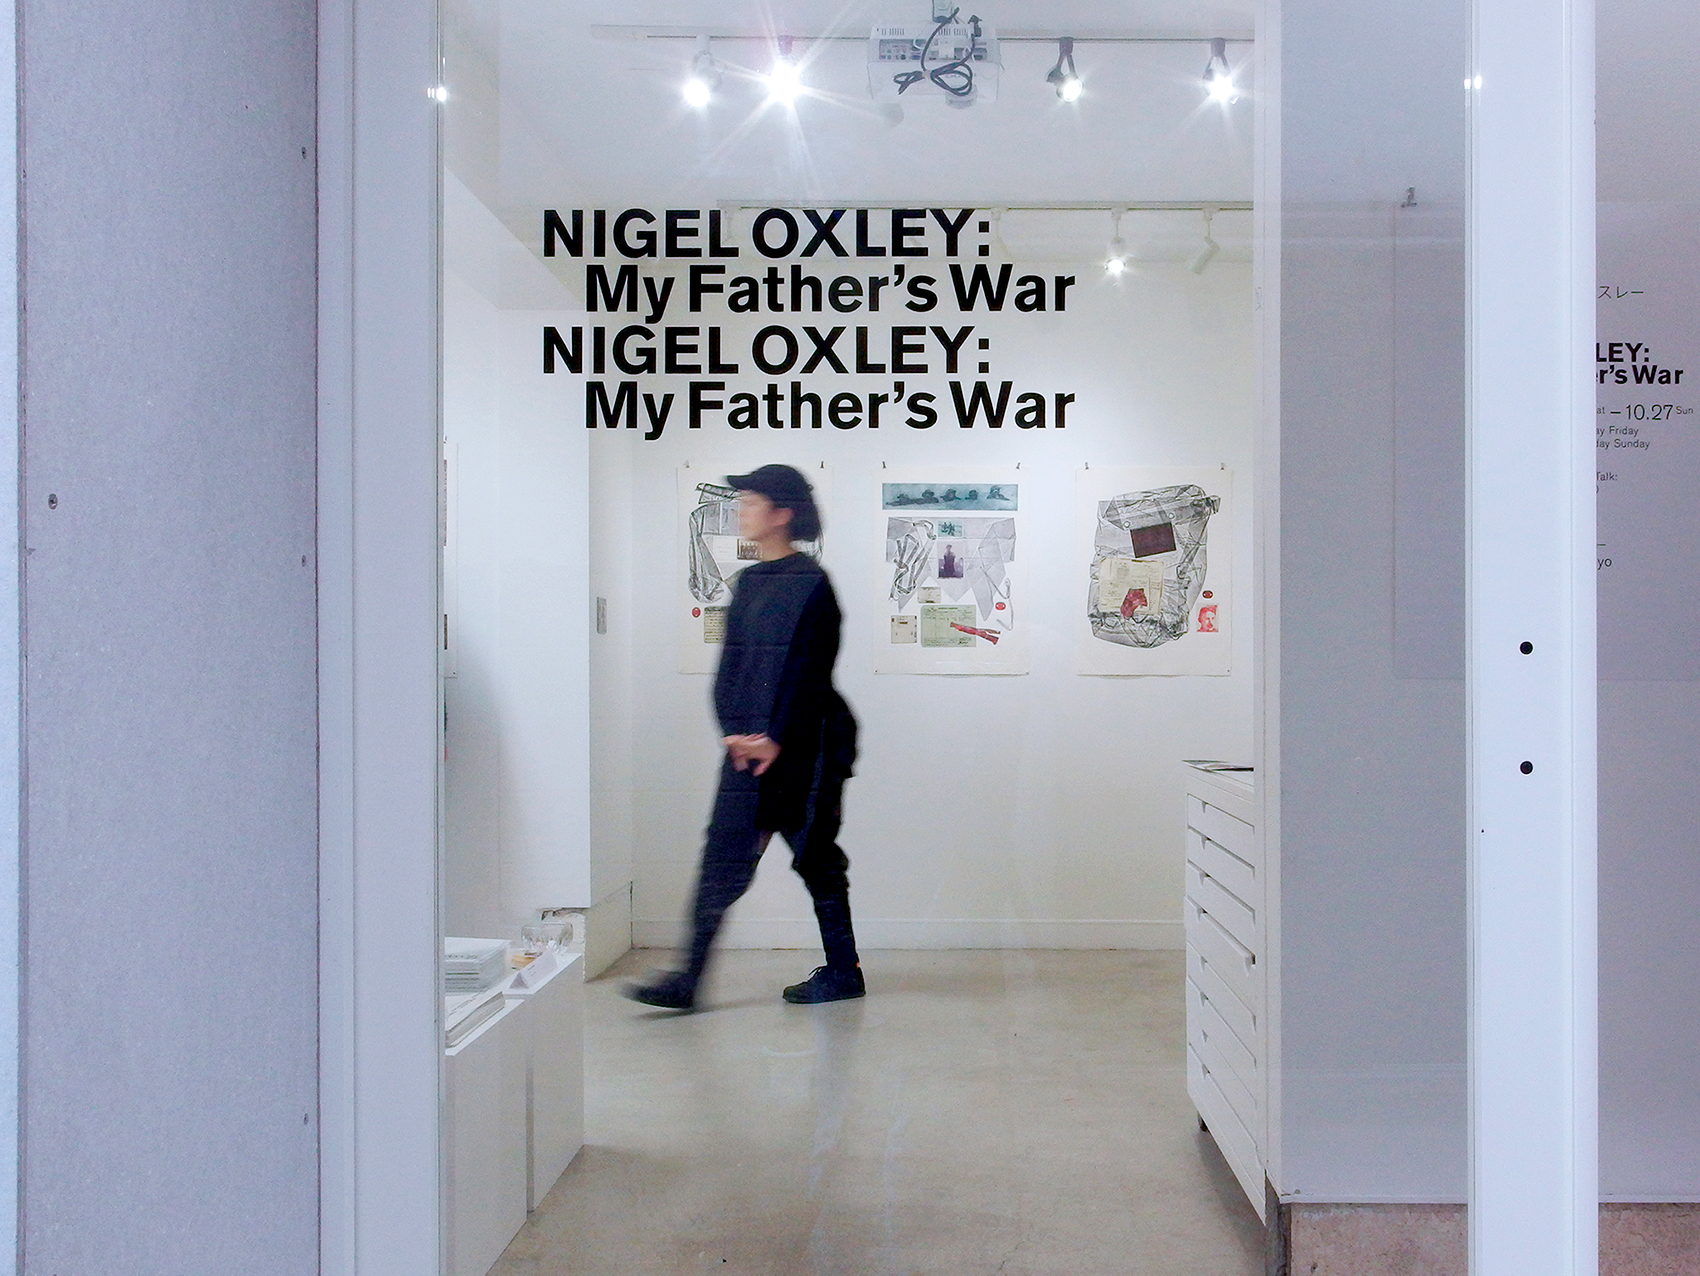 Exhibition by Nigel Oxley, My Father's War